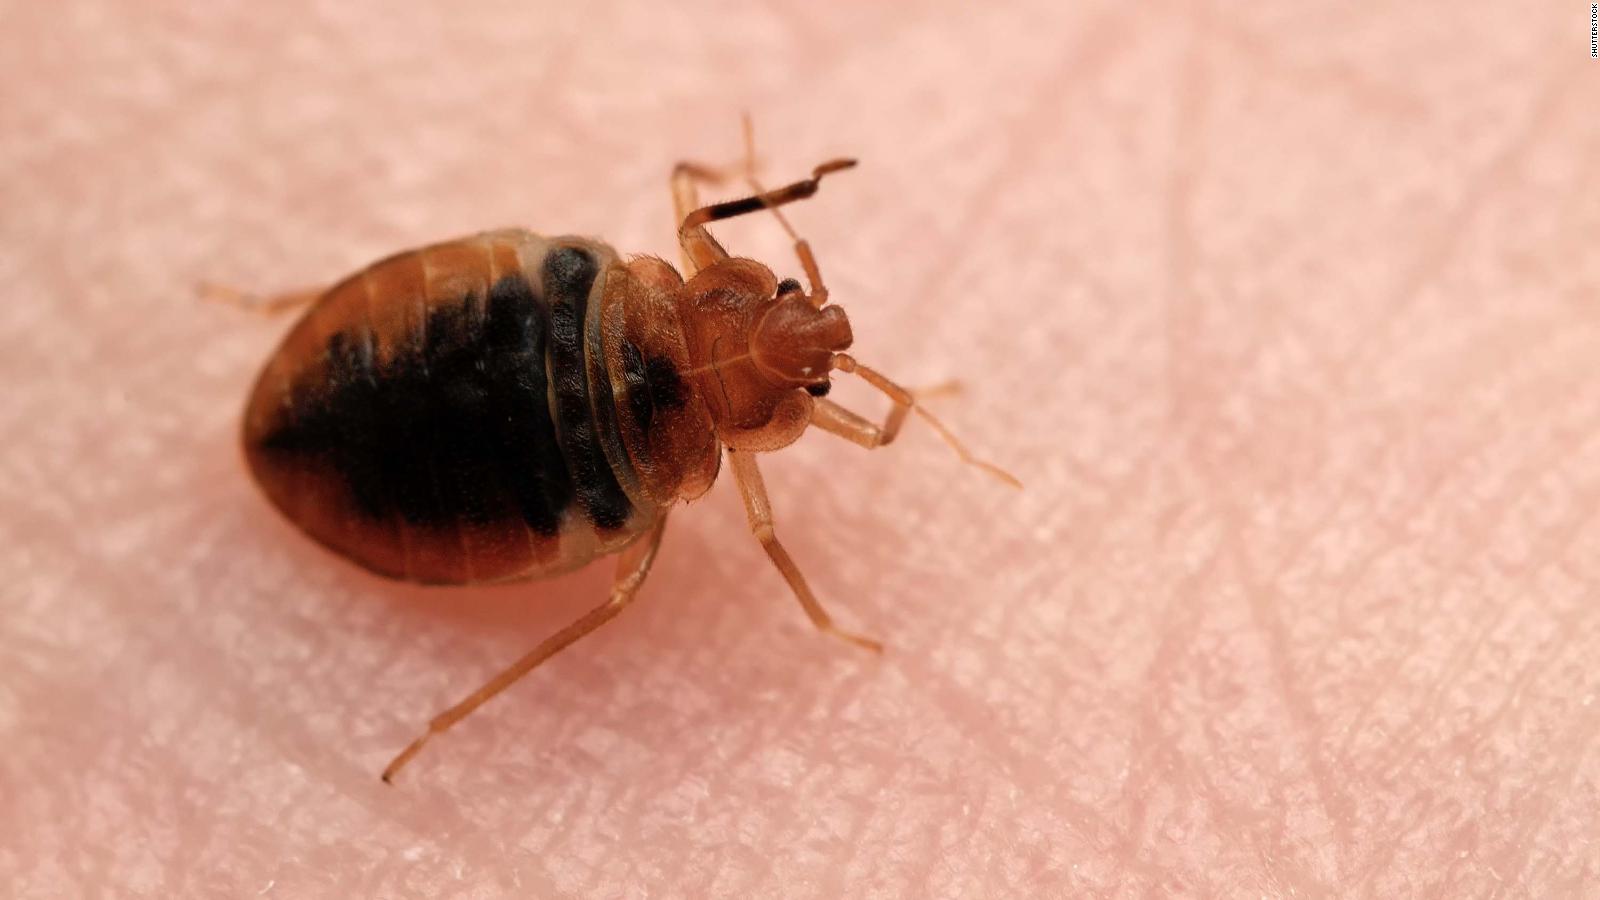 A bedbug filled with blood on a person's skin